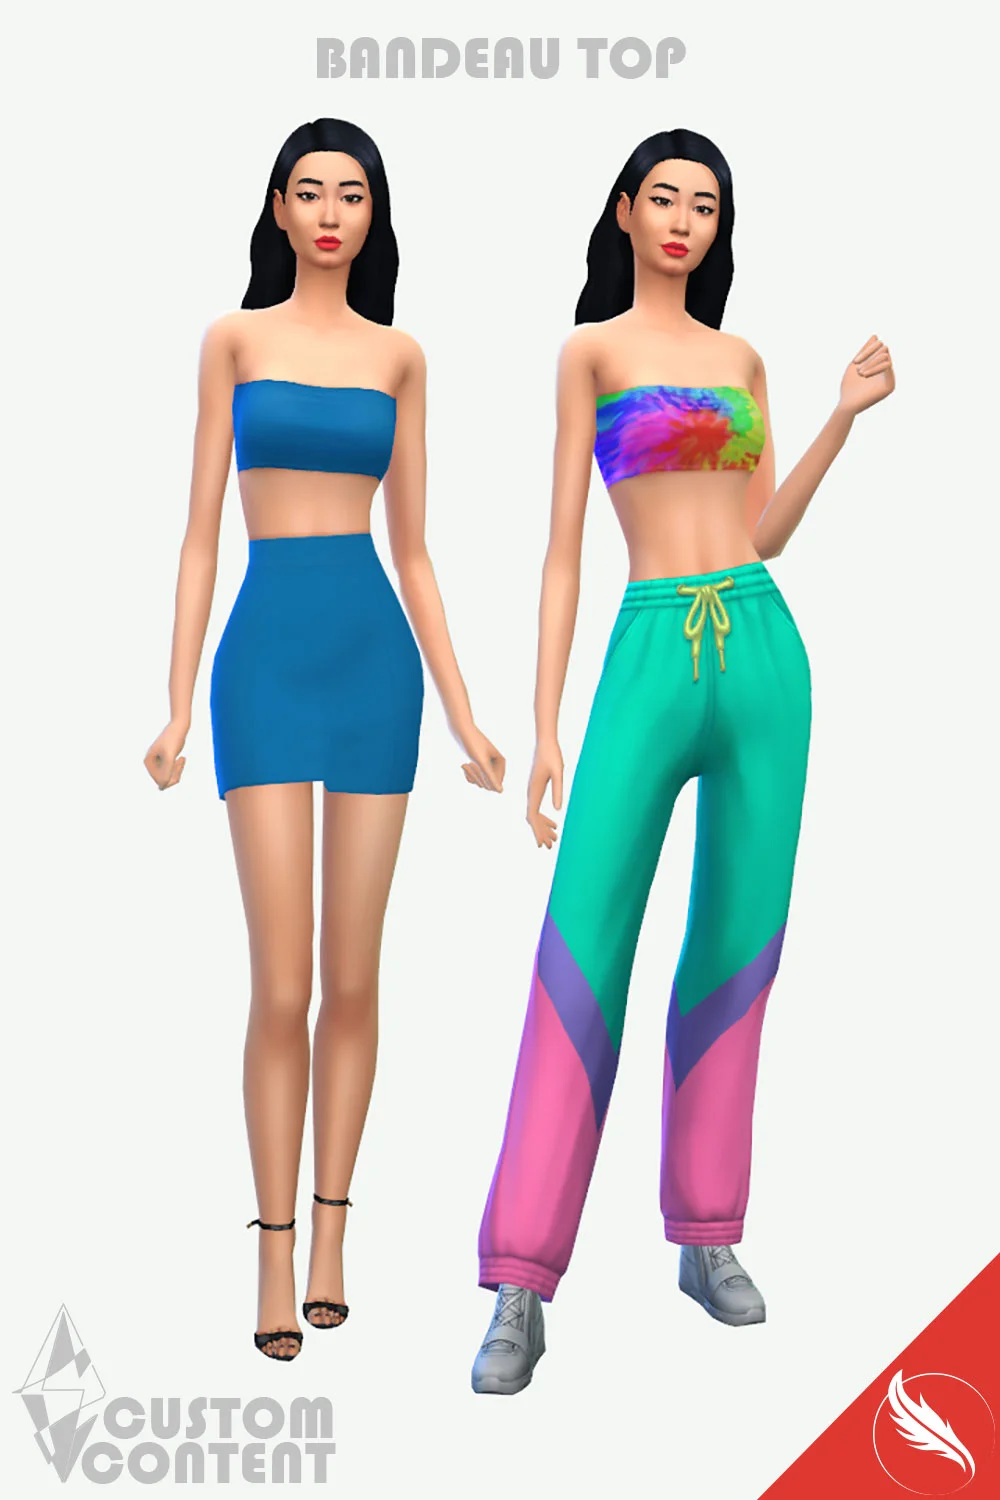 The Sims 4 Bandeau Top Custom Content